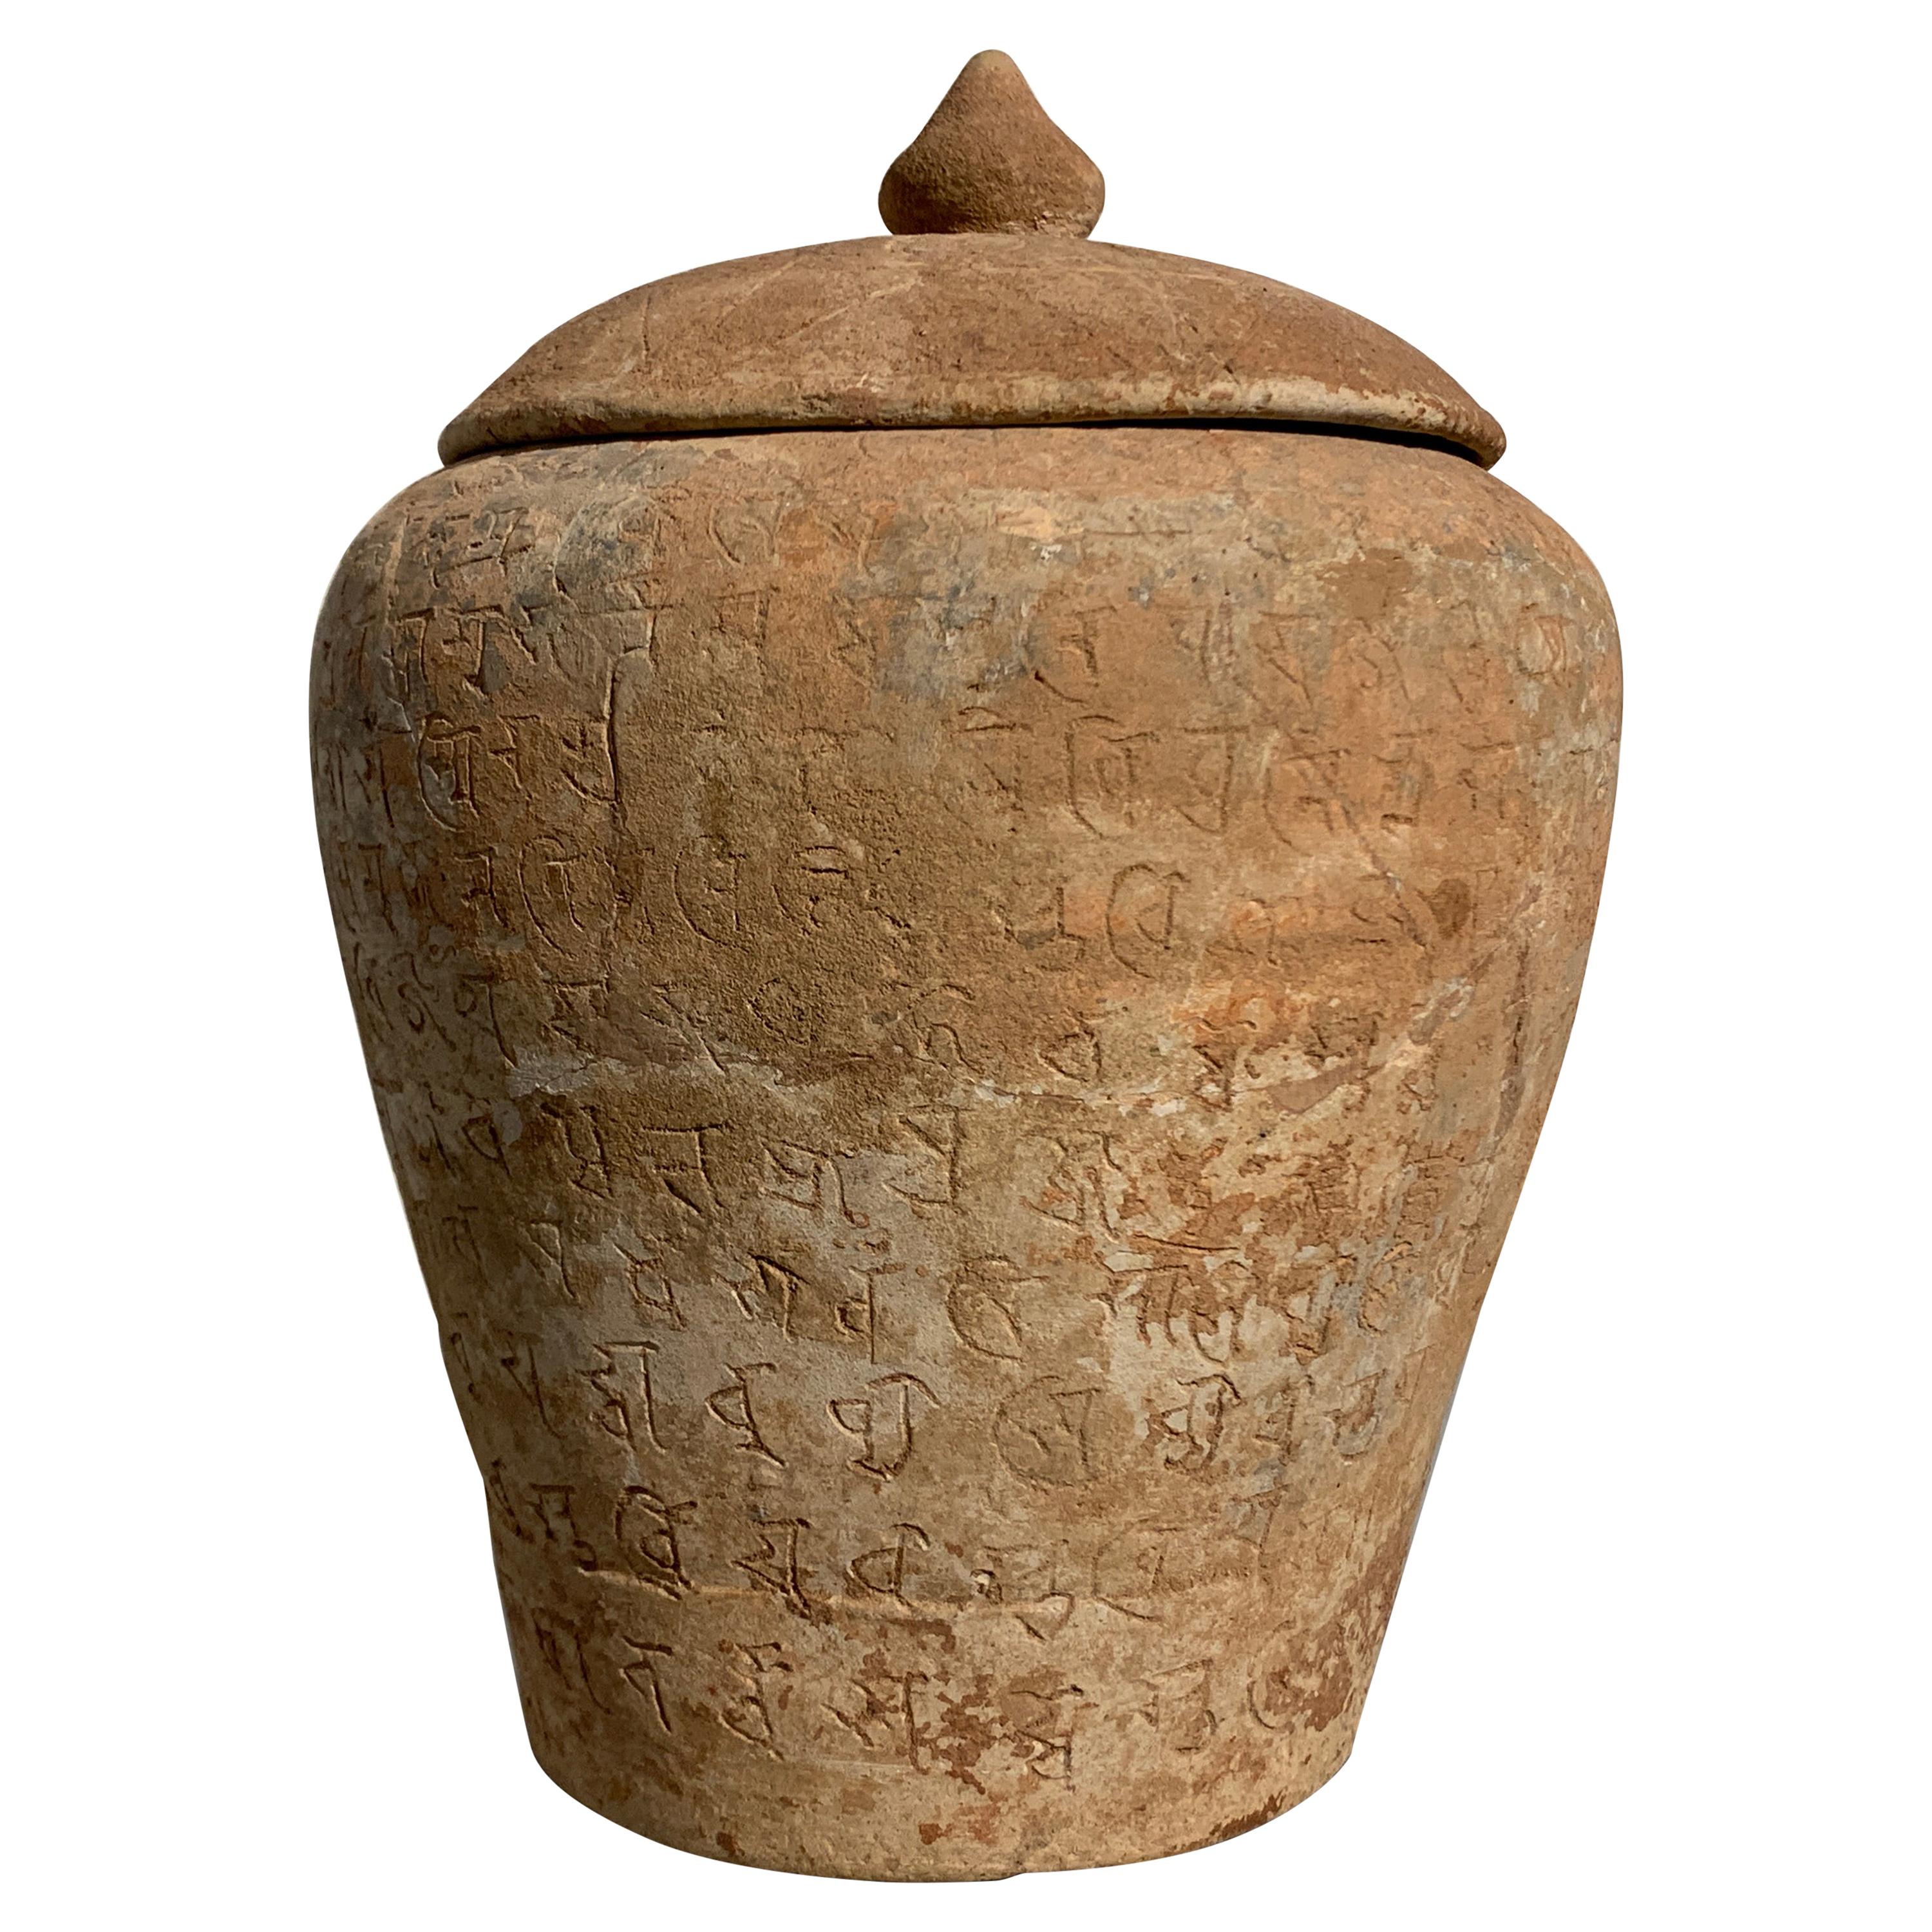 Song Dynasty Pottery Jar with Sanskrit Inscriptions, 11th/12th Century, China